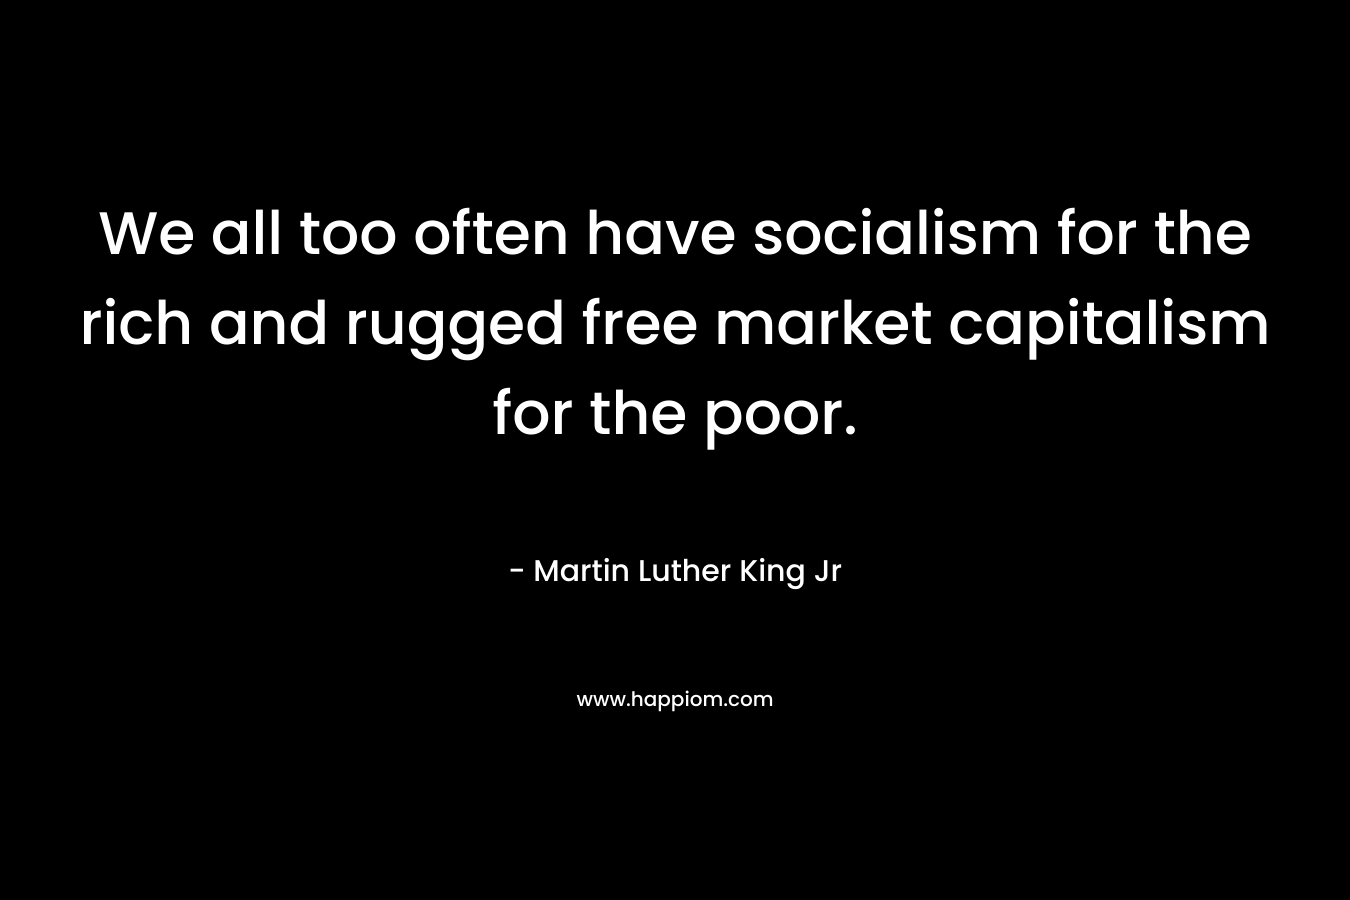 We all too often have socialism for the rich and rugged free market capitalism for the poor. – Martin Luther King Jr